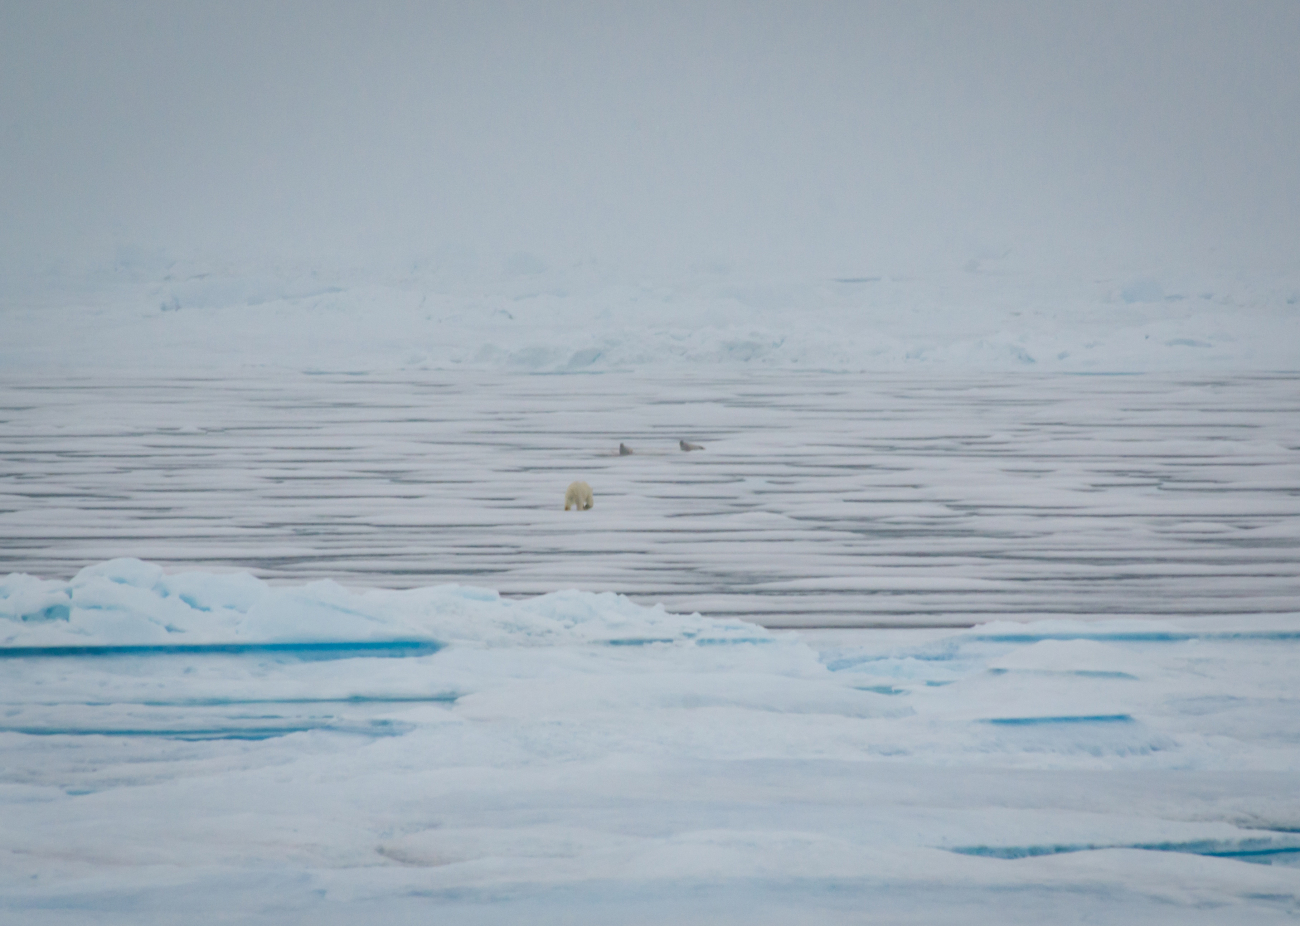 A polar bear attempting to ambush a pair of ribbon seals, which quickly slippedinto the water when the bear got too close